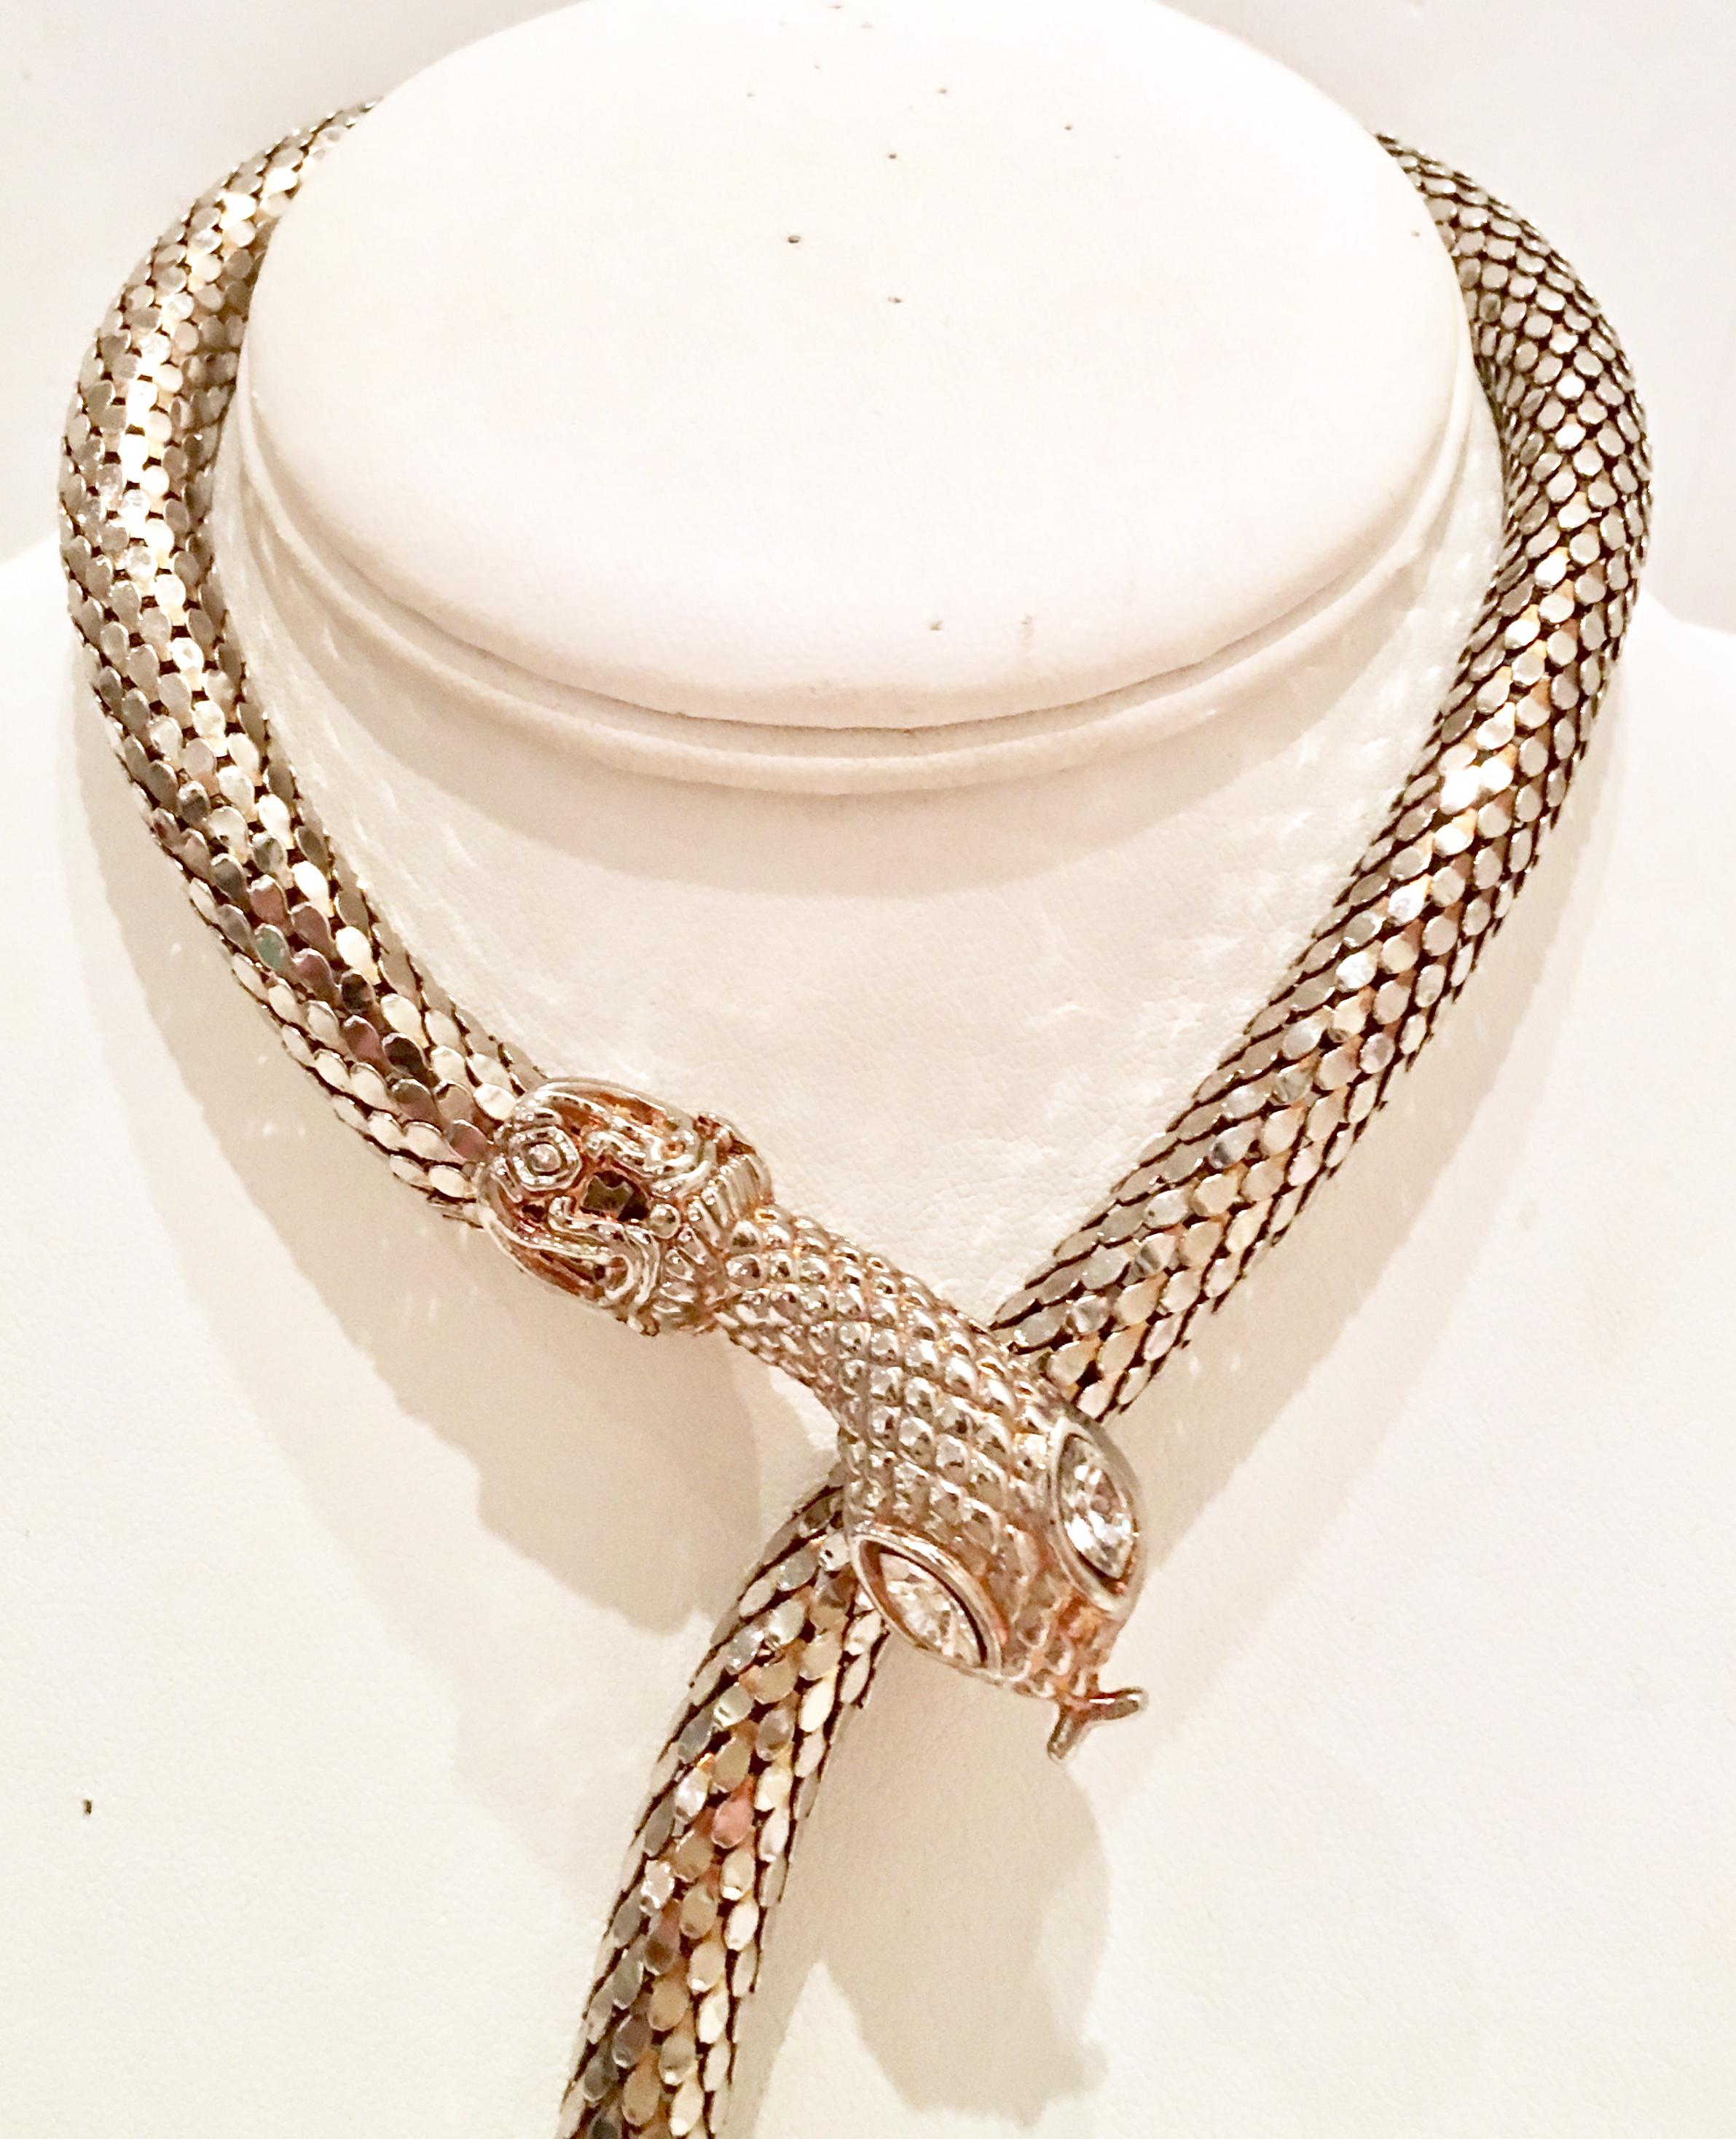 20th Century Silver & Gold Gilt Metal Mesh & Swarovski Crystal Clear Rhinestone Adjustable Coil Snake Necklace By, Whiting & Davis . This coveted and rare piece features a silver coil metal mesh body with gold gilt detail at the snake head and tail.